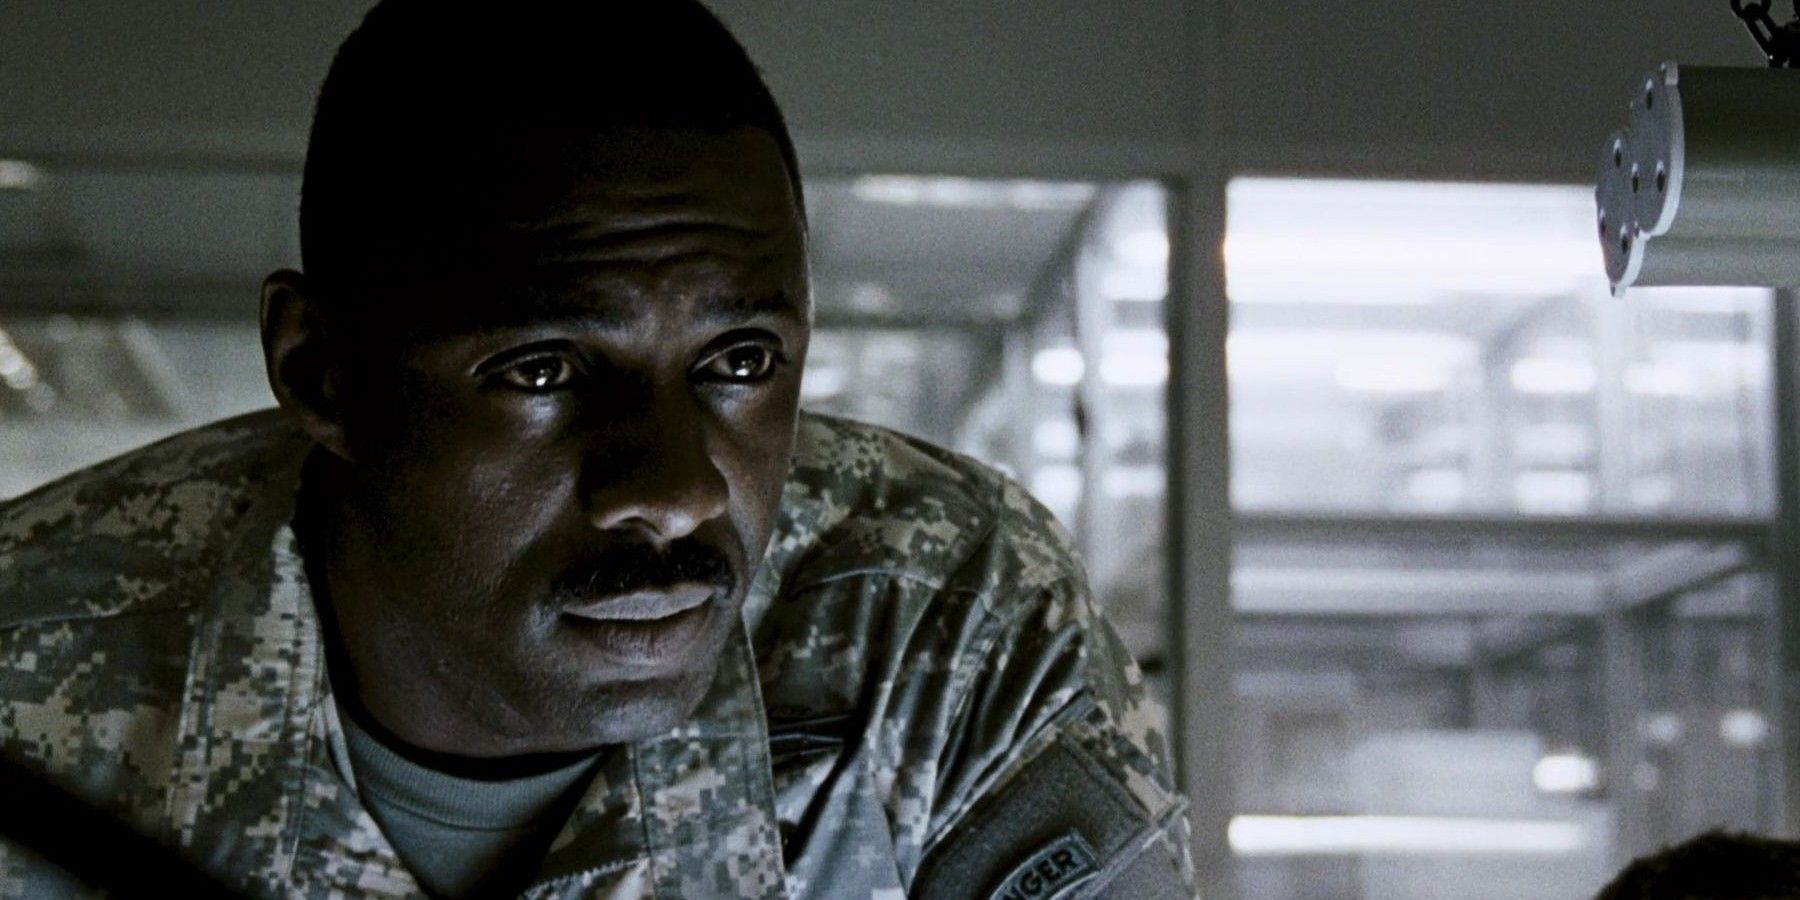 Idris Elba in military fatigues in 28 Weeks Later